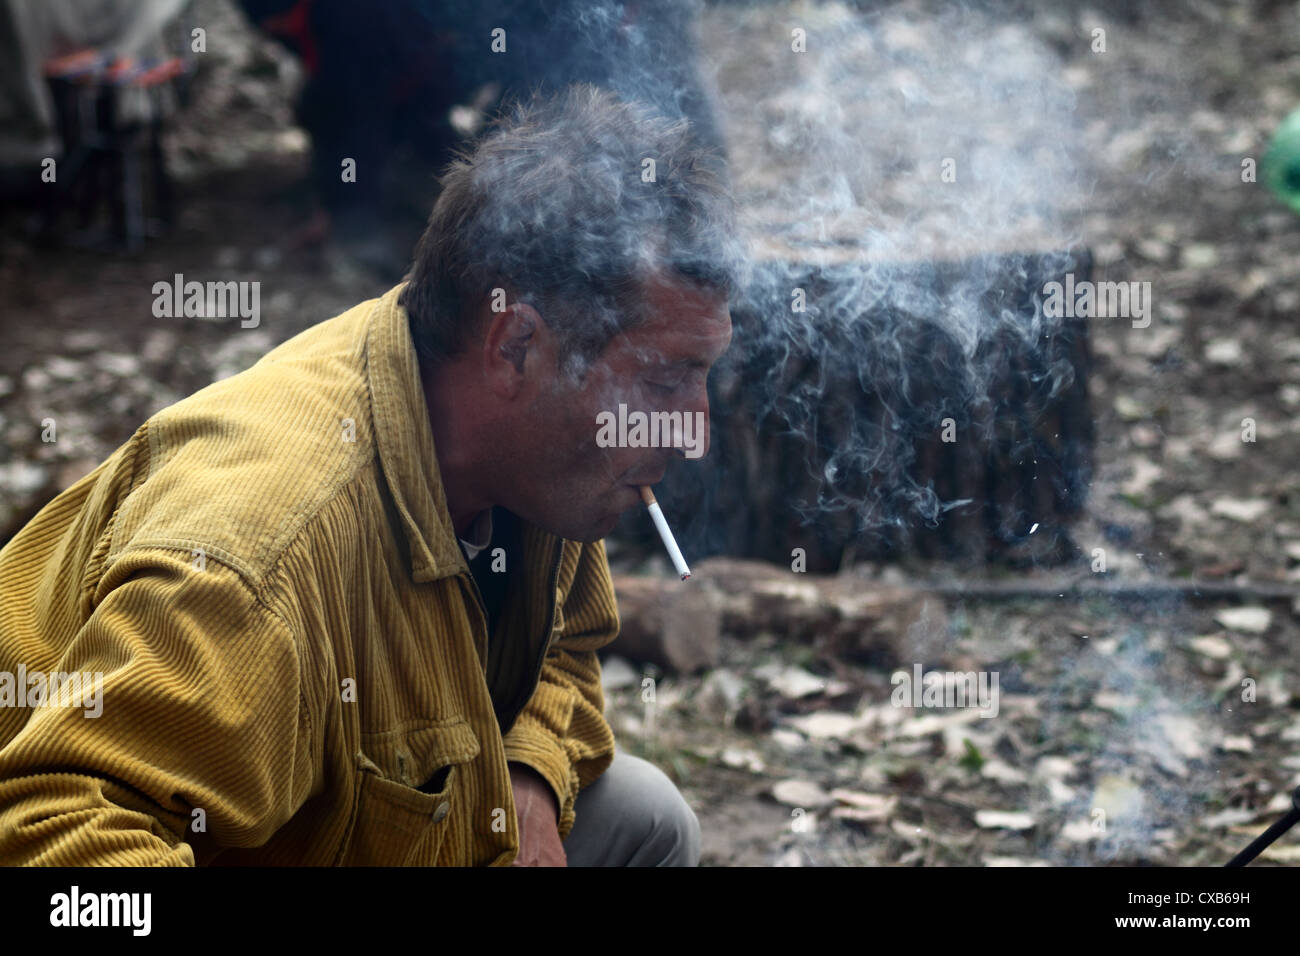 man lights a cigarette with a burning stick Stock Photo